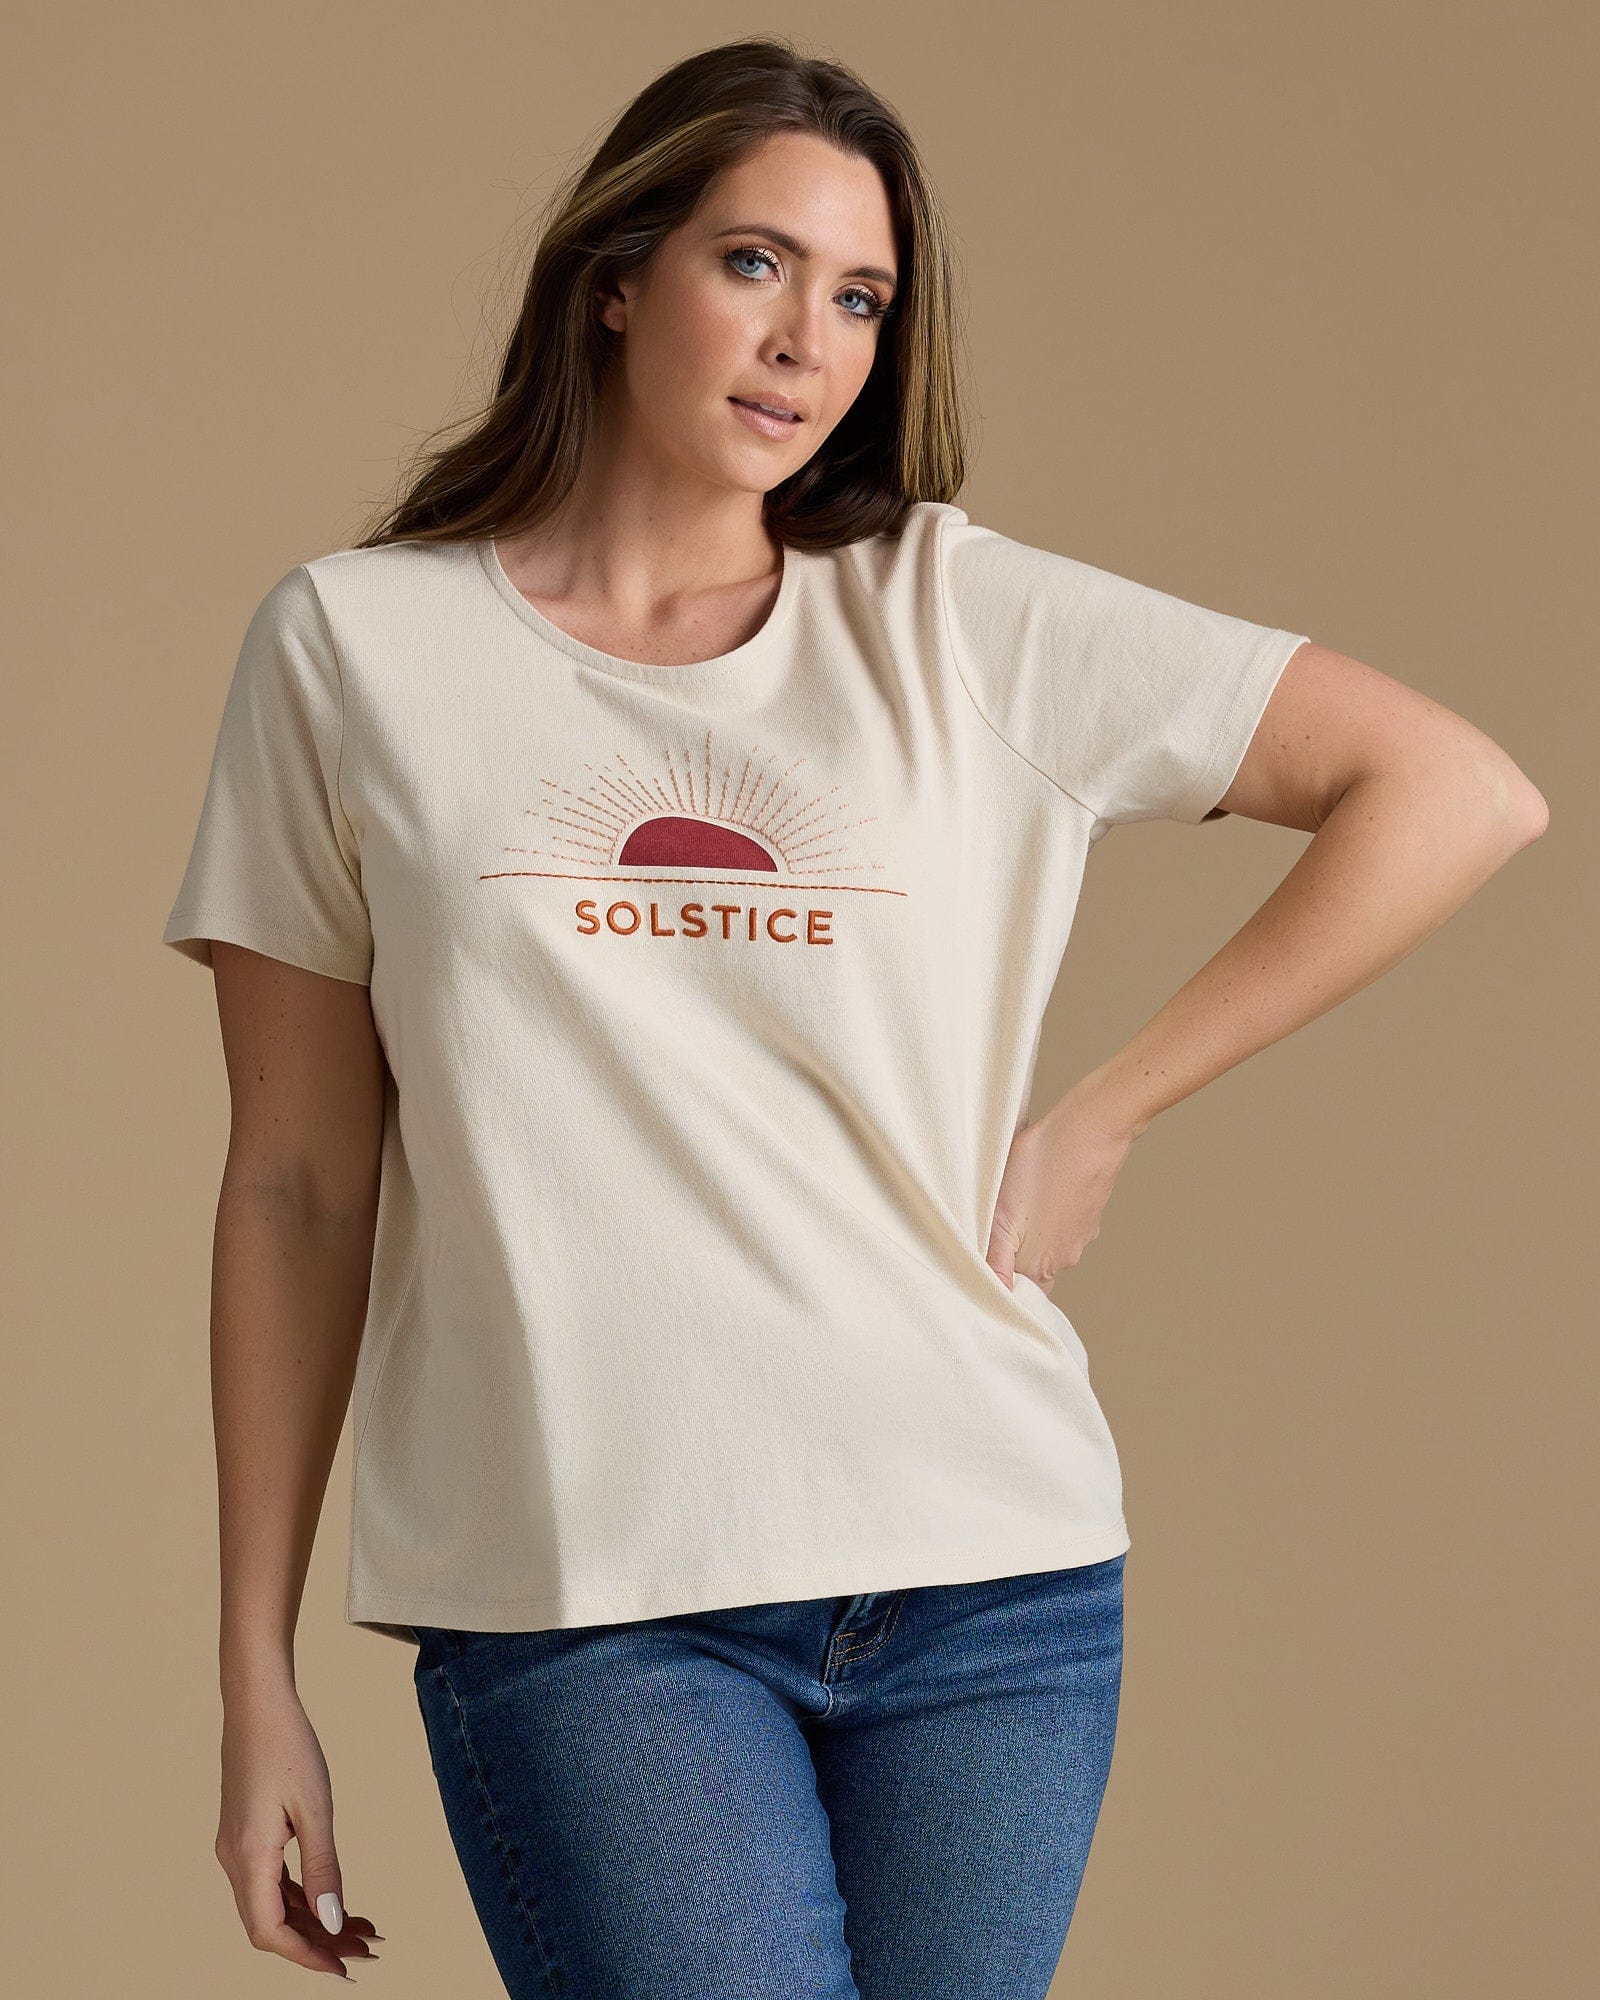 Woman in a tan graphic tee that says "solstice"